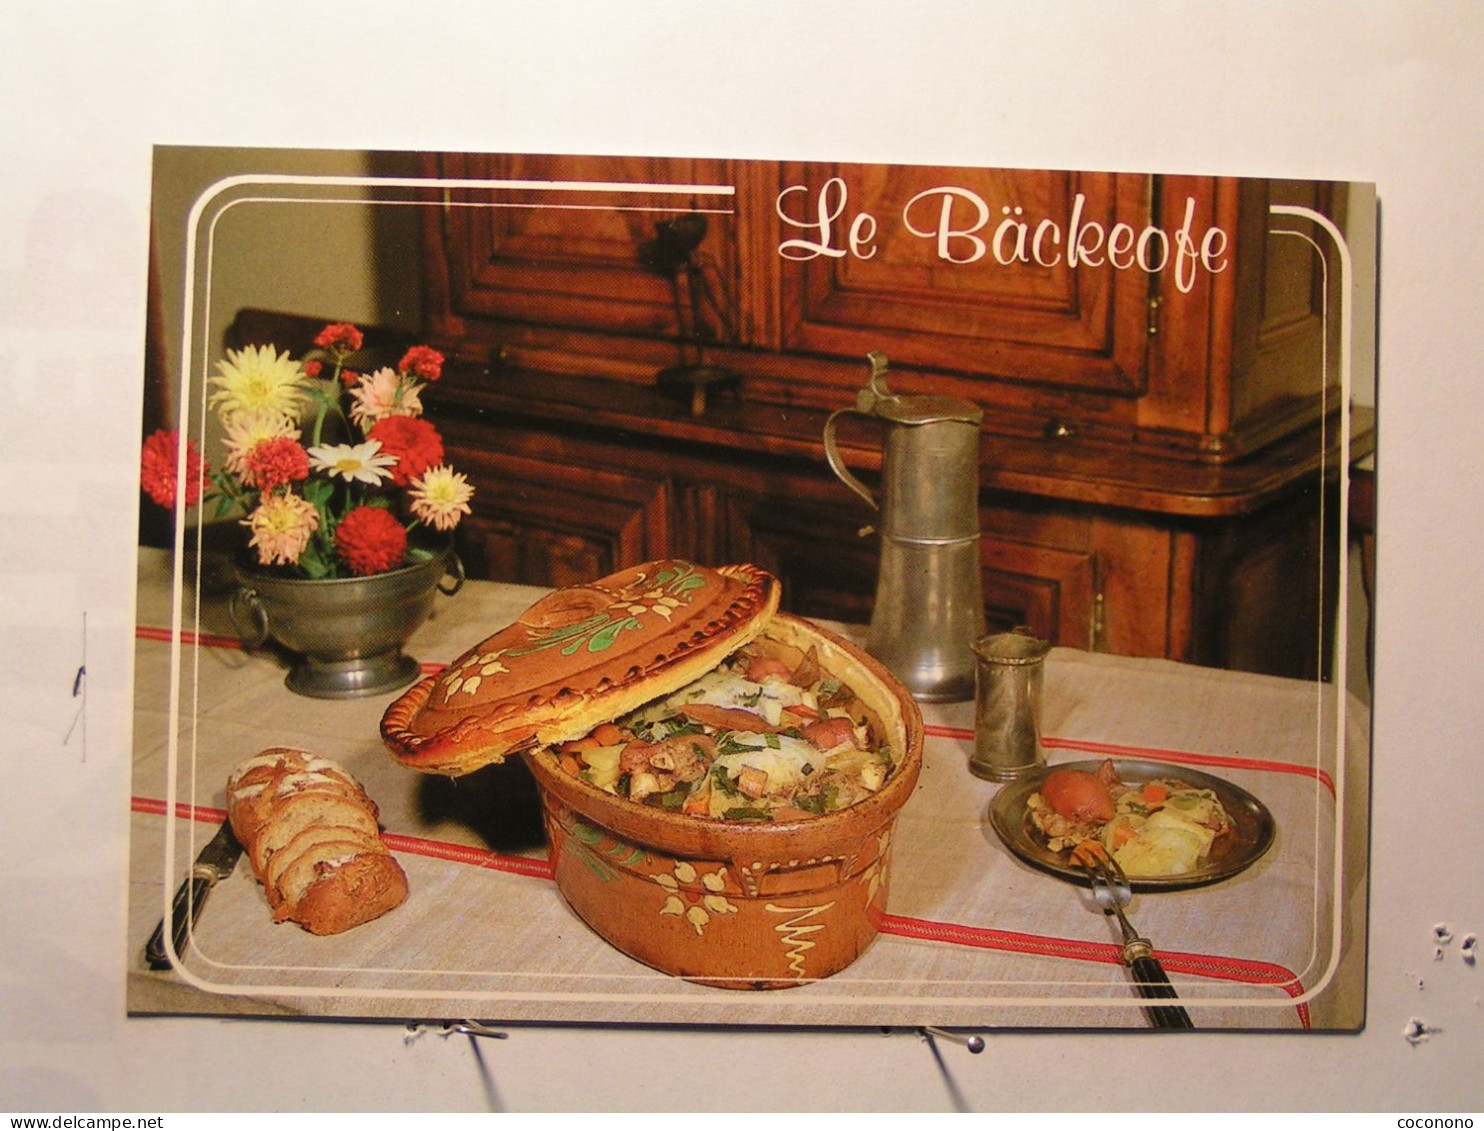 Recettes (cuisine) - Le Backeofe - Recipes (cooking)